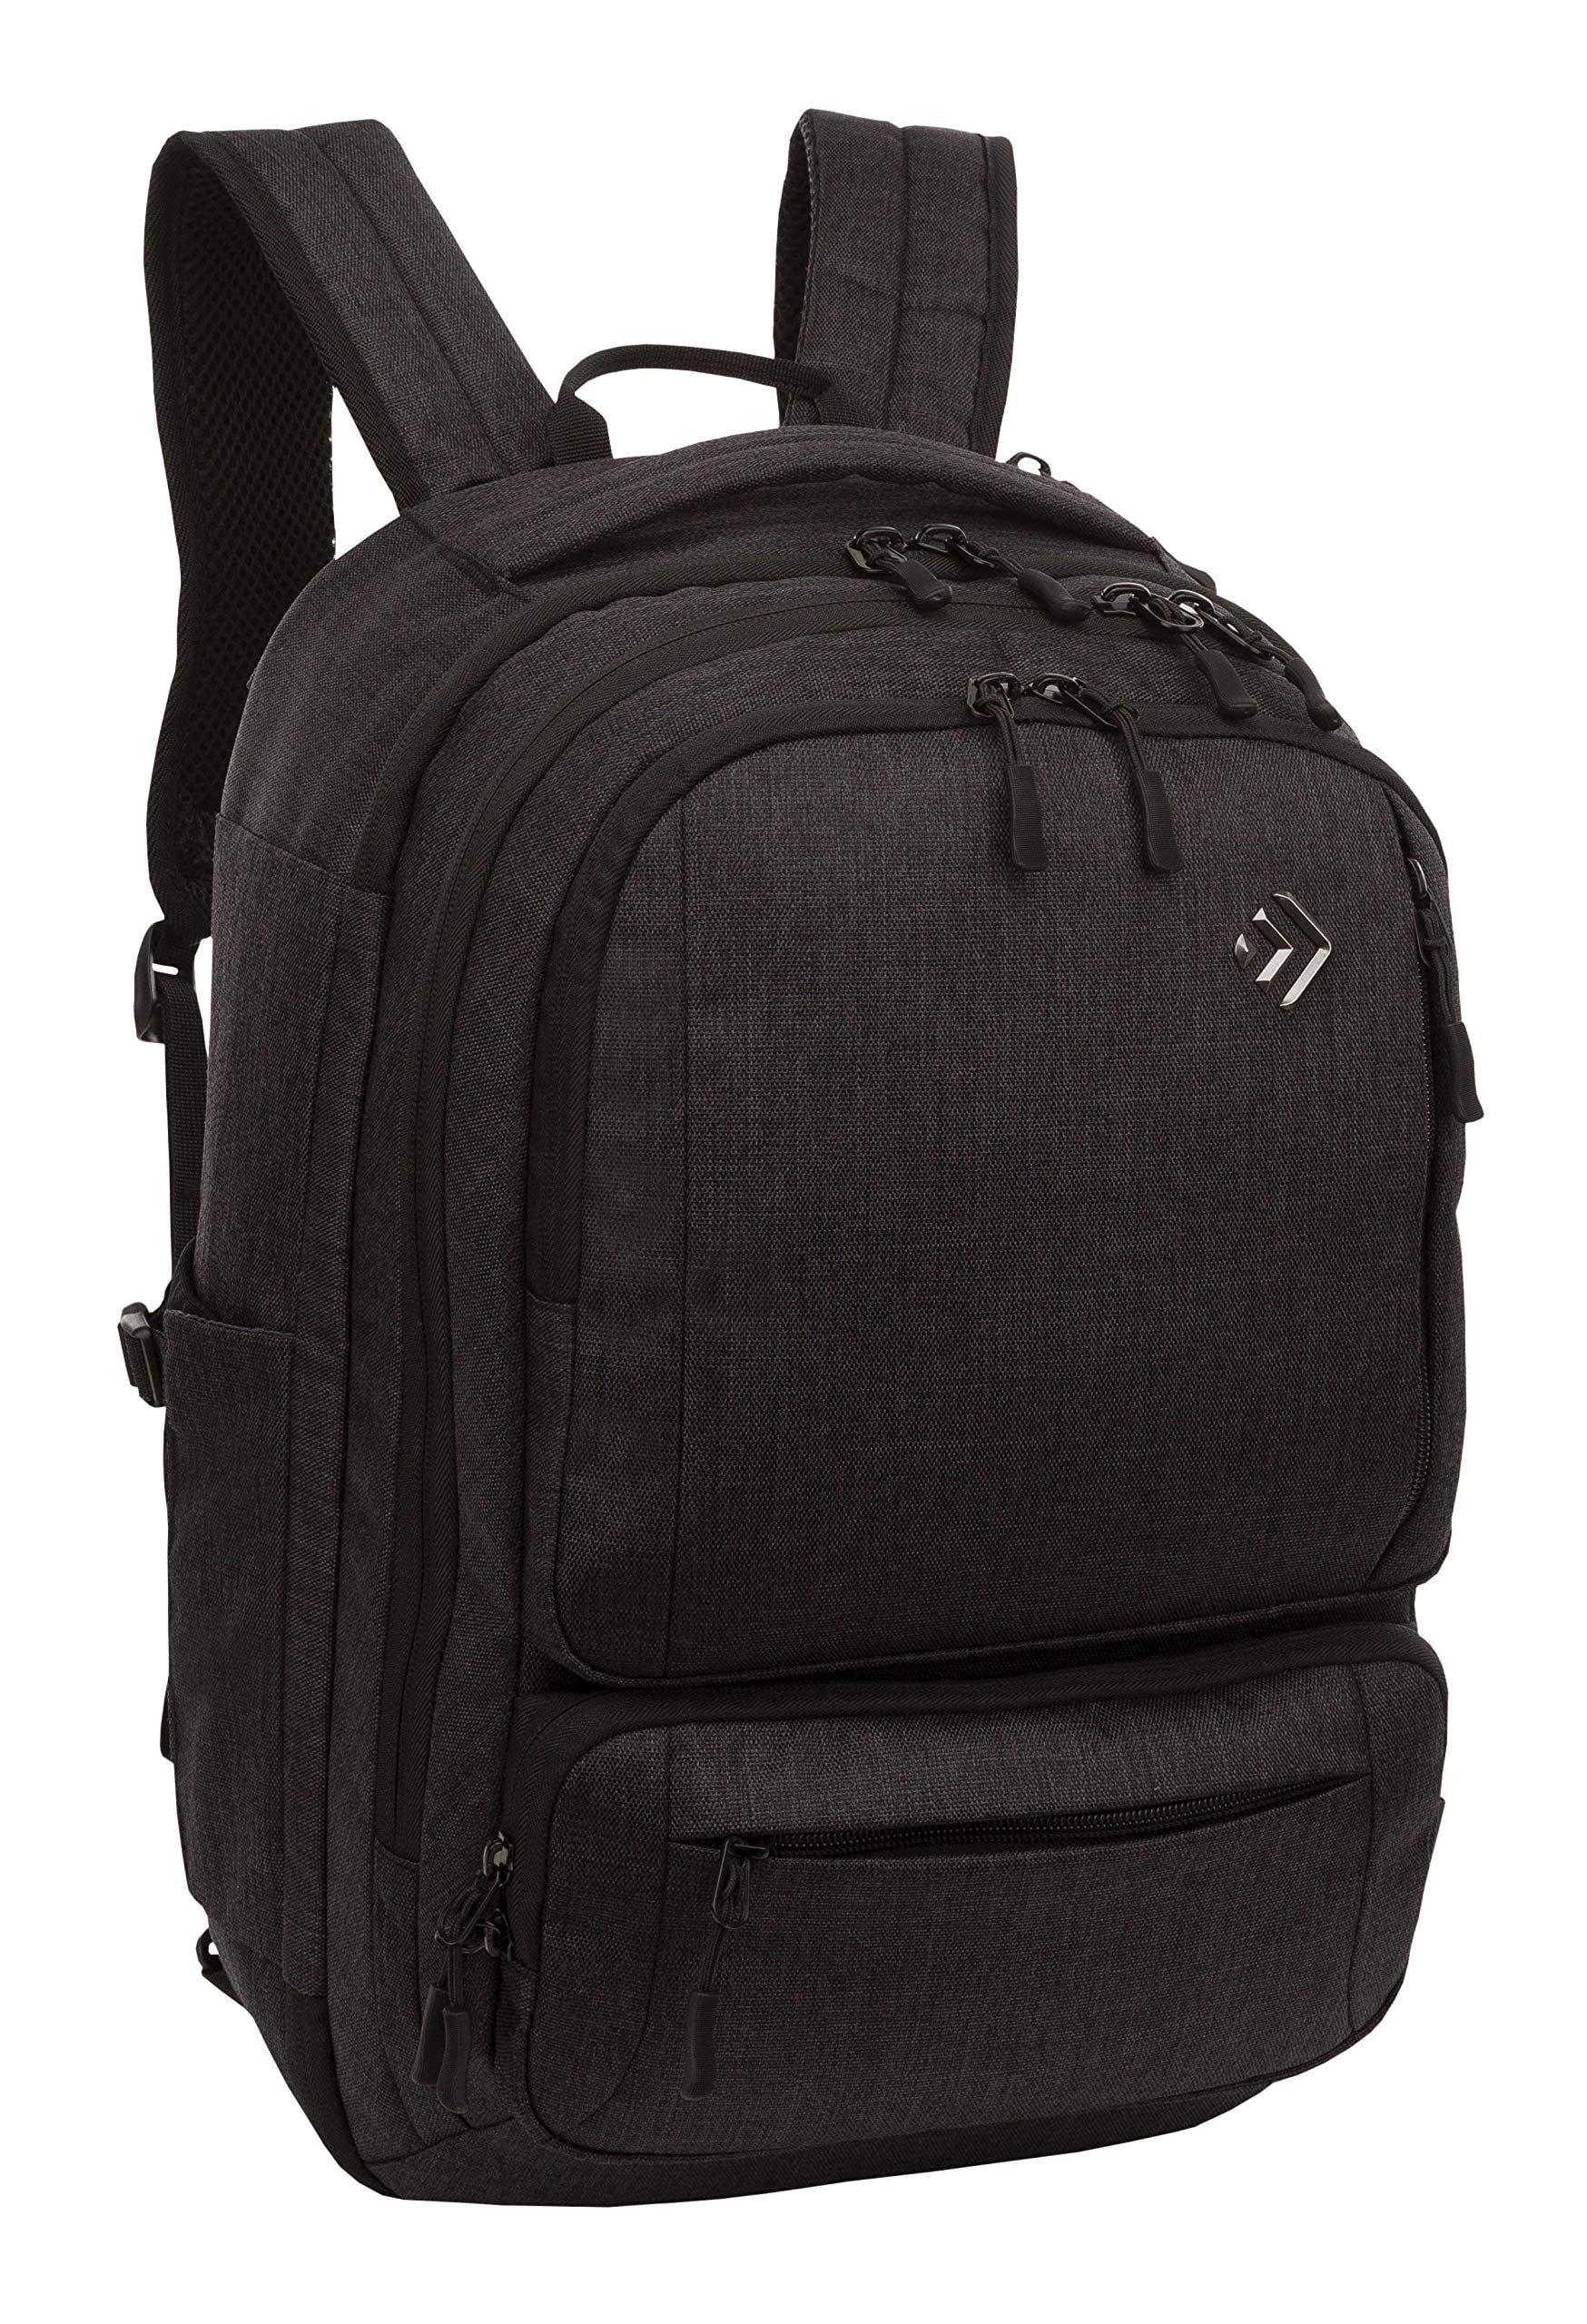 Outdoor Products Daily Assist Briefcase / Backpack - Walmart.com